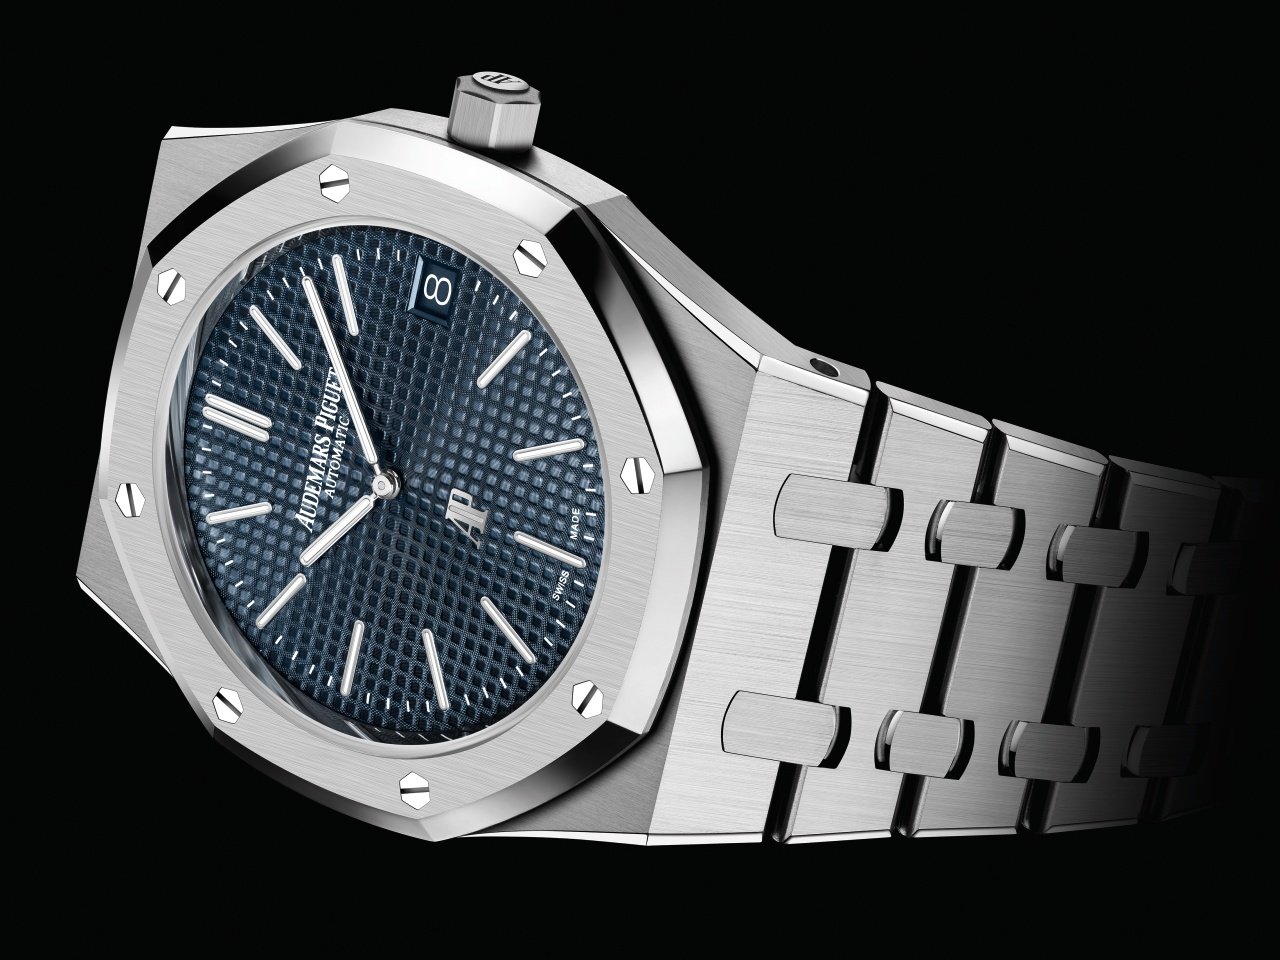 An introduction to the new Royal Oak “Jumbo” Extra-Thin